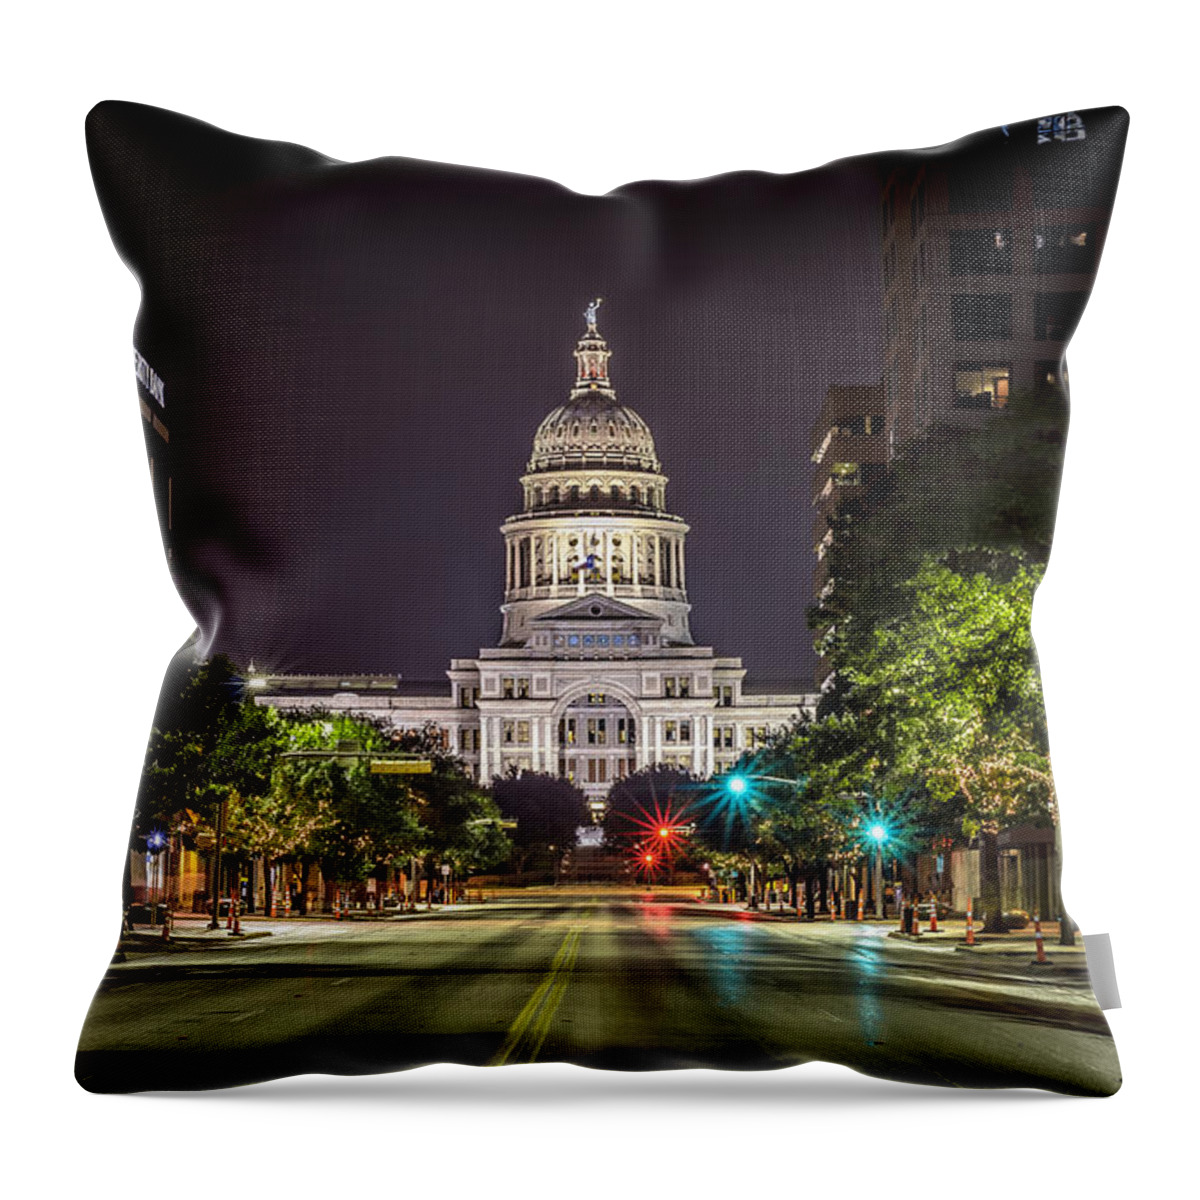 Austin Throw Pillow featuring the photograph The Texas Capitol Building by David Morefield